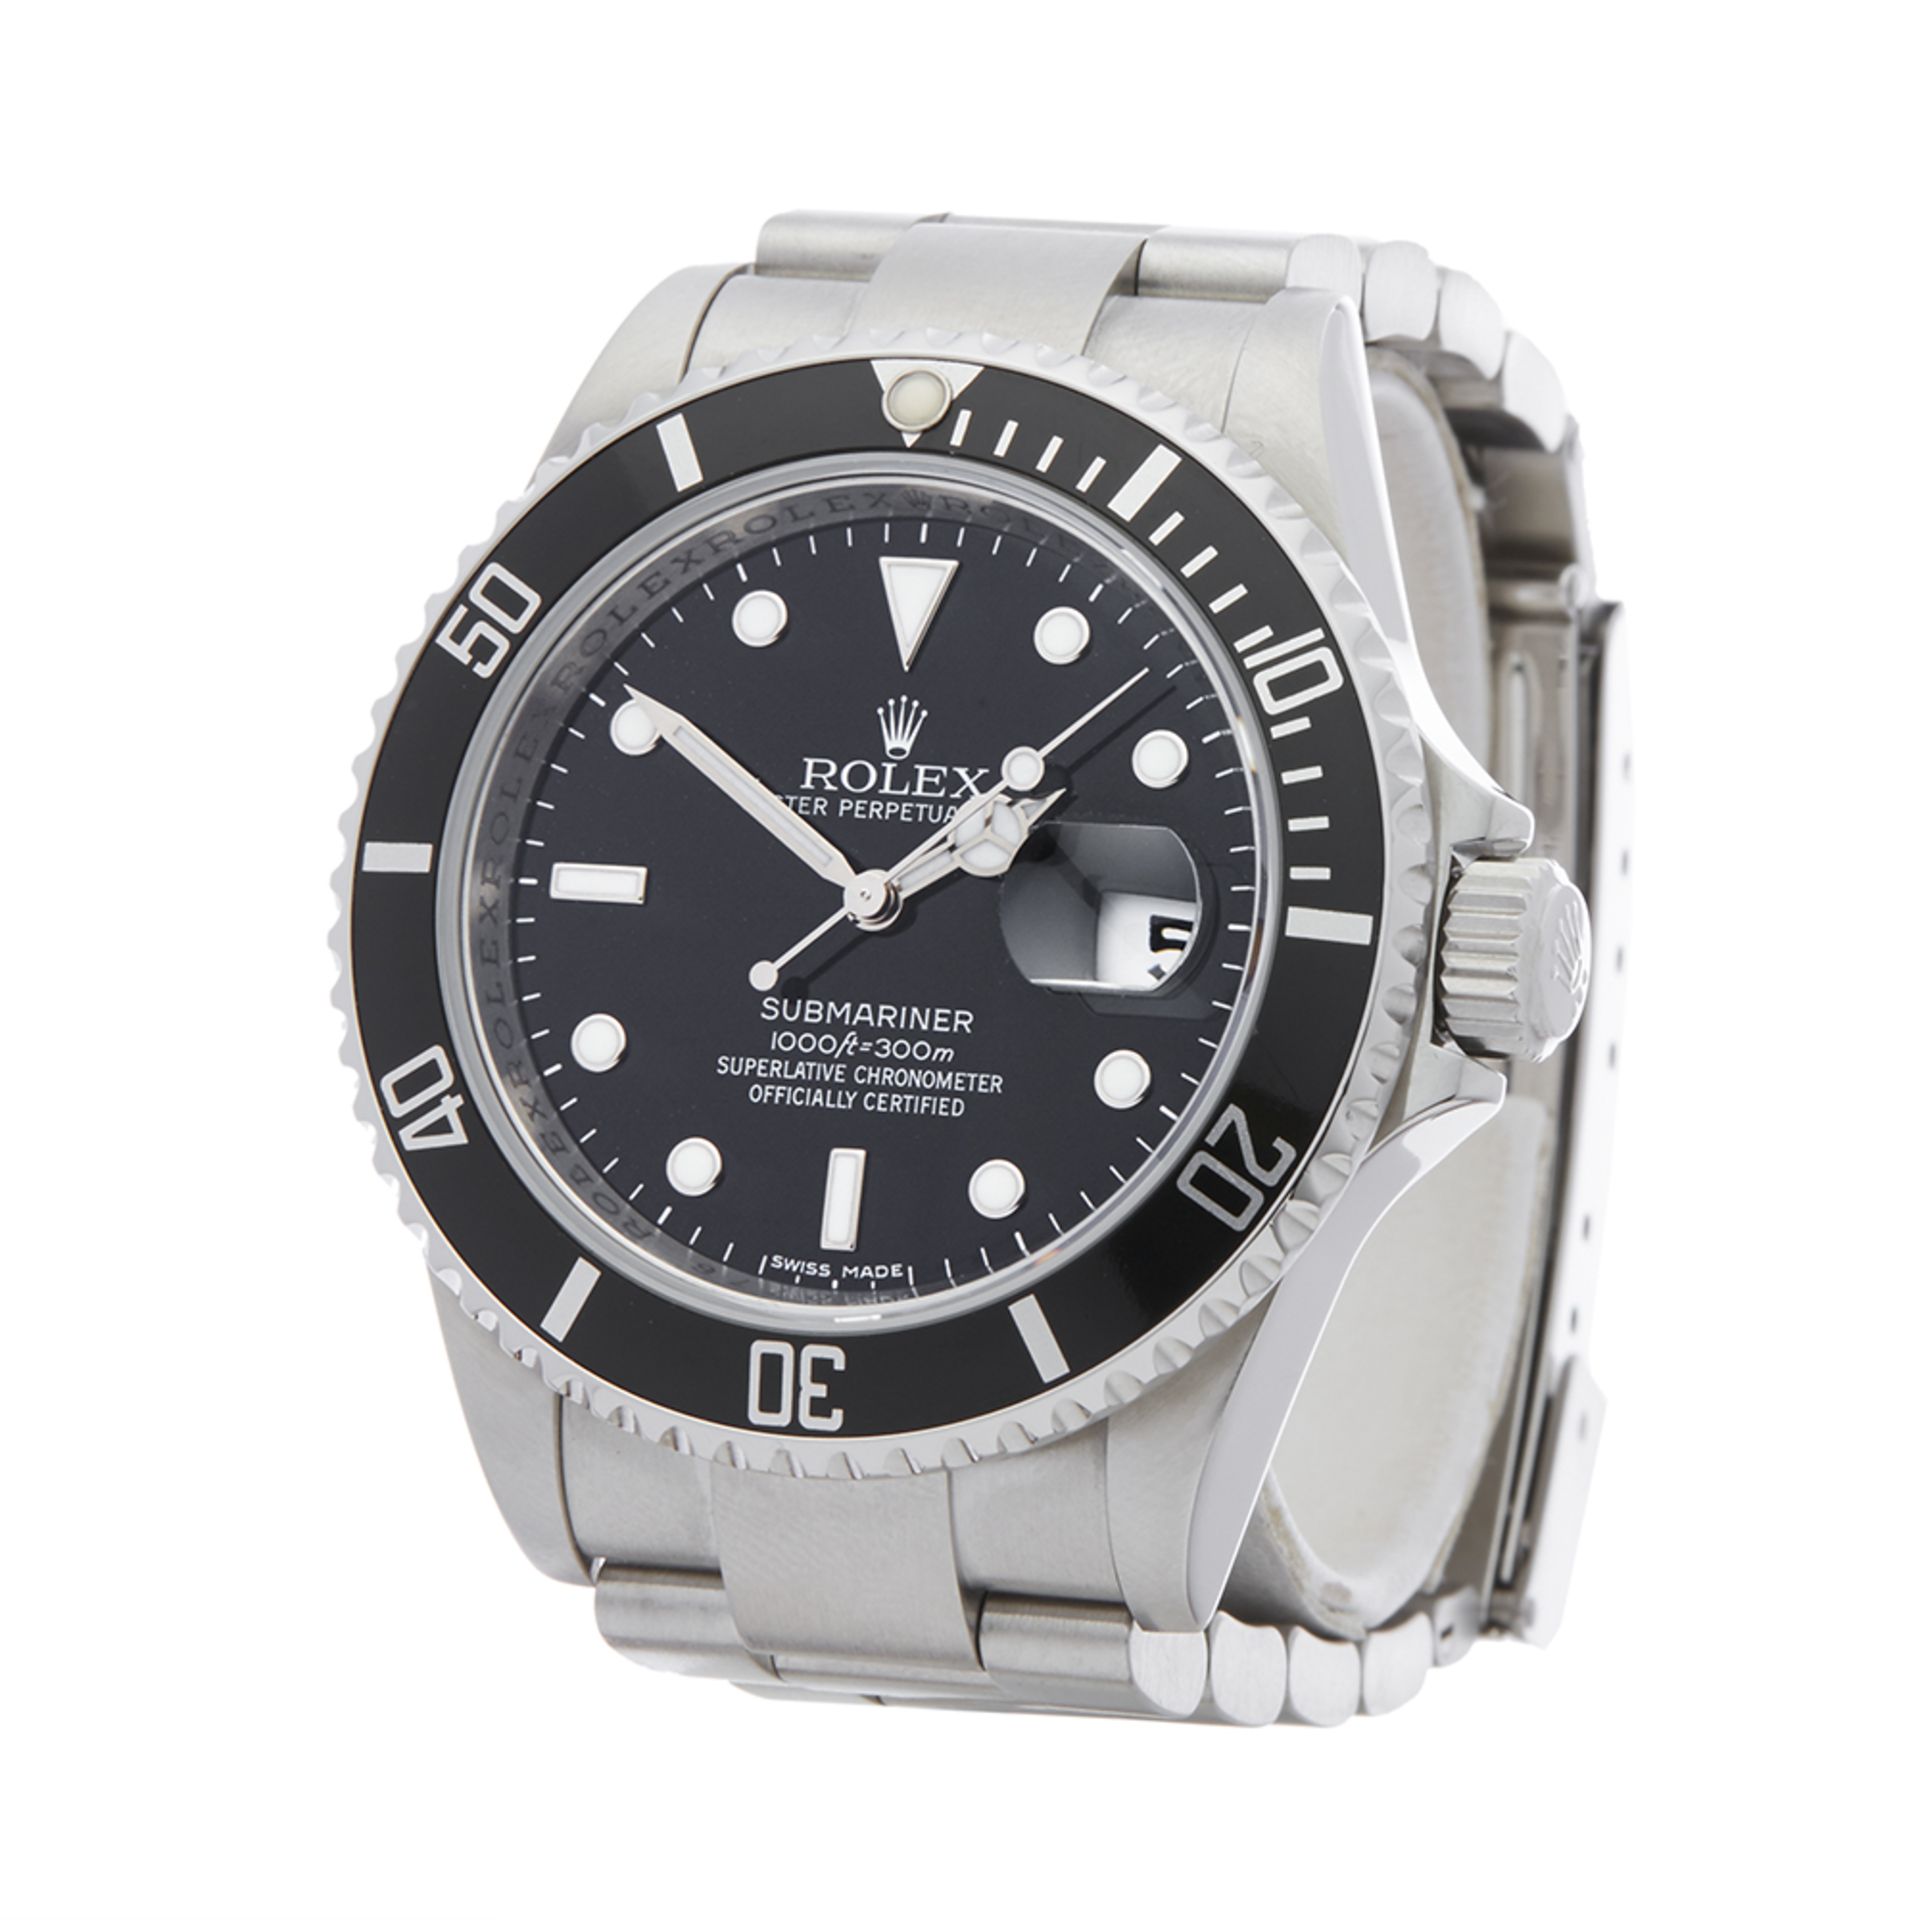 Rolex Submariner 40mm Stainless Steel - 16610LN - Image 3 of 8